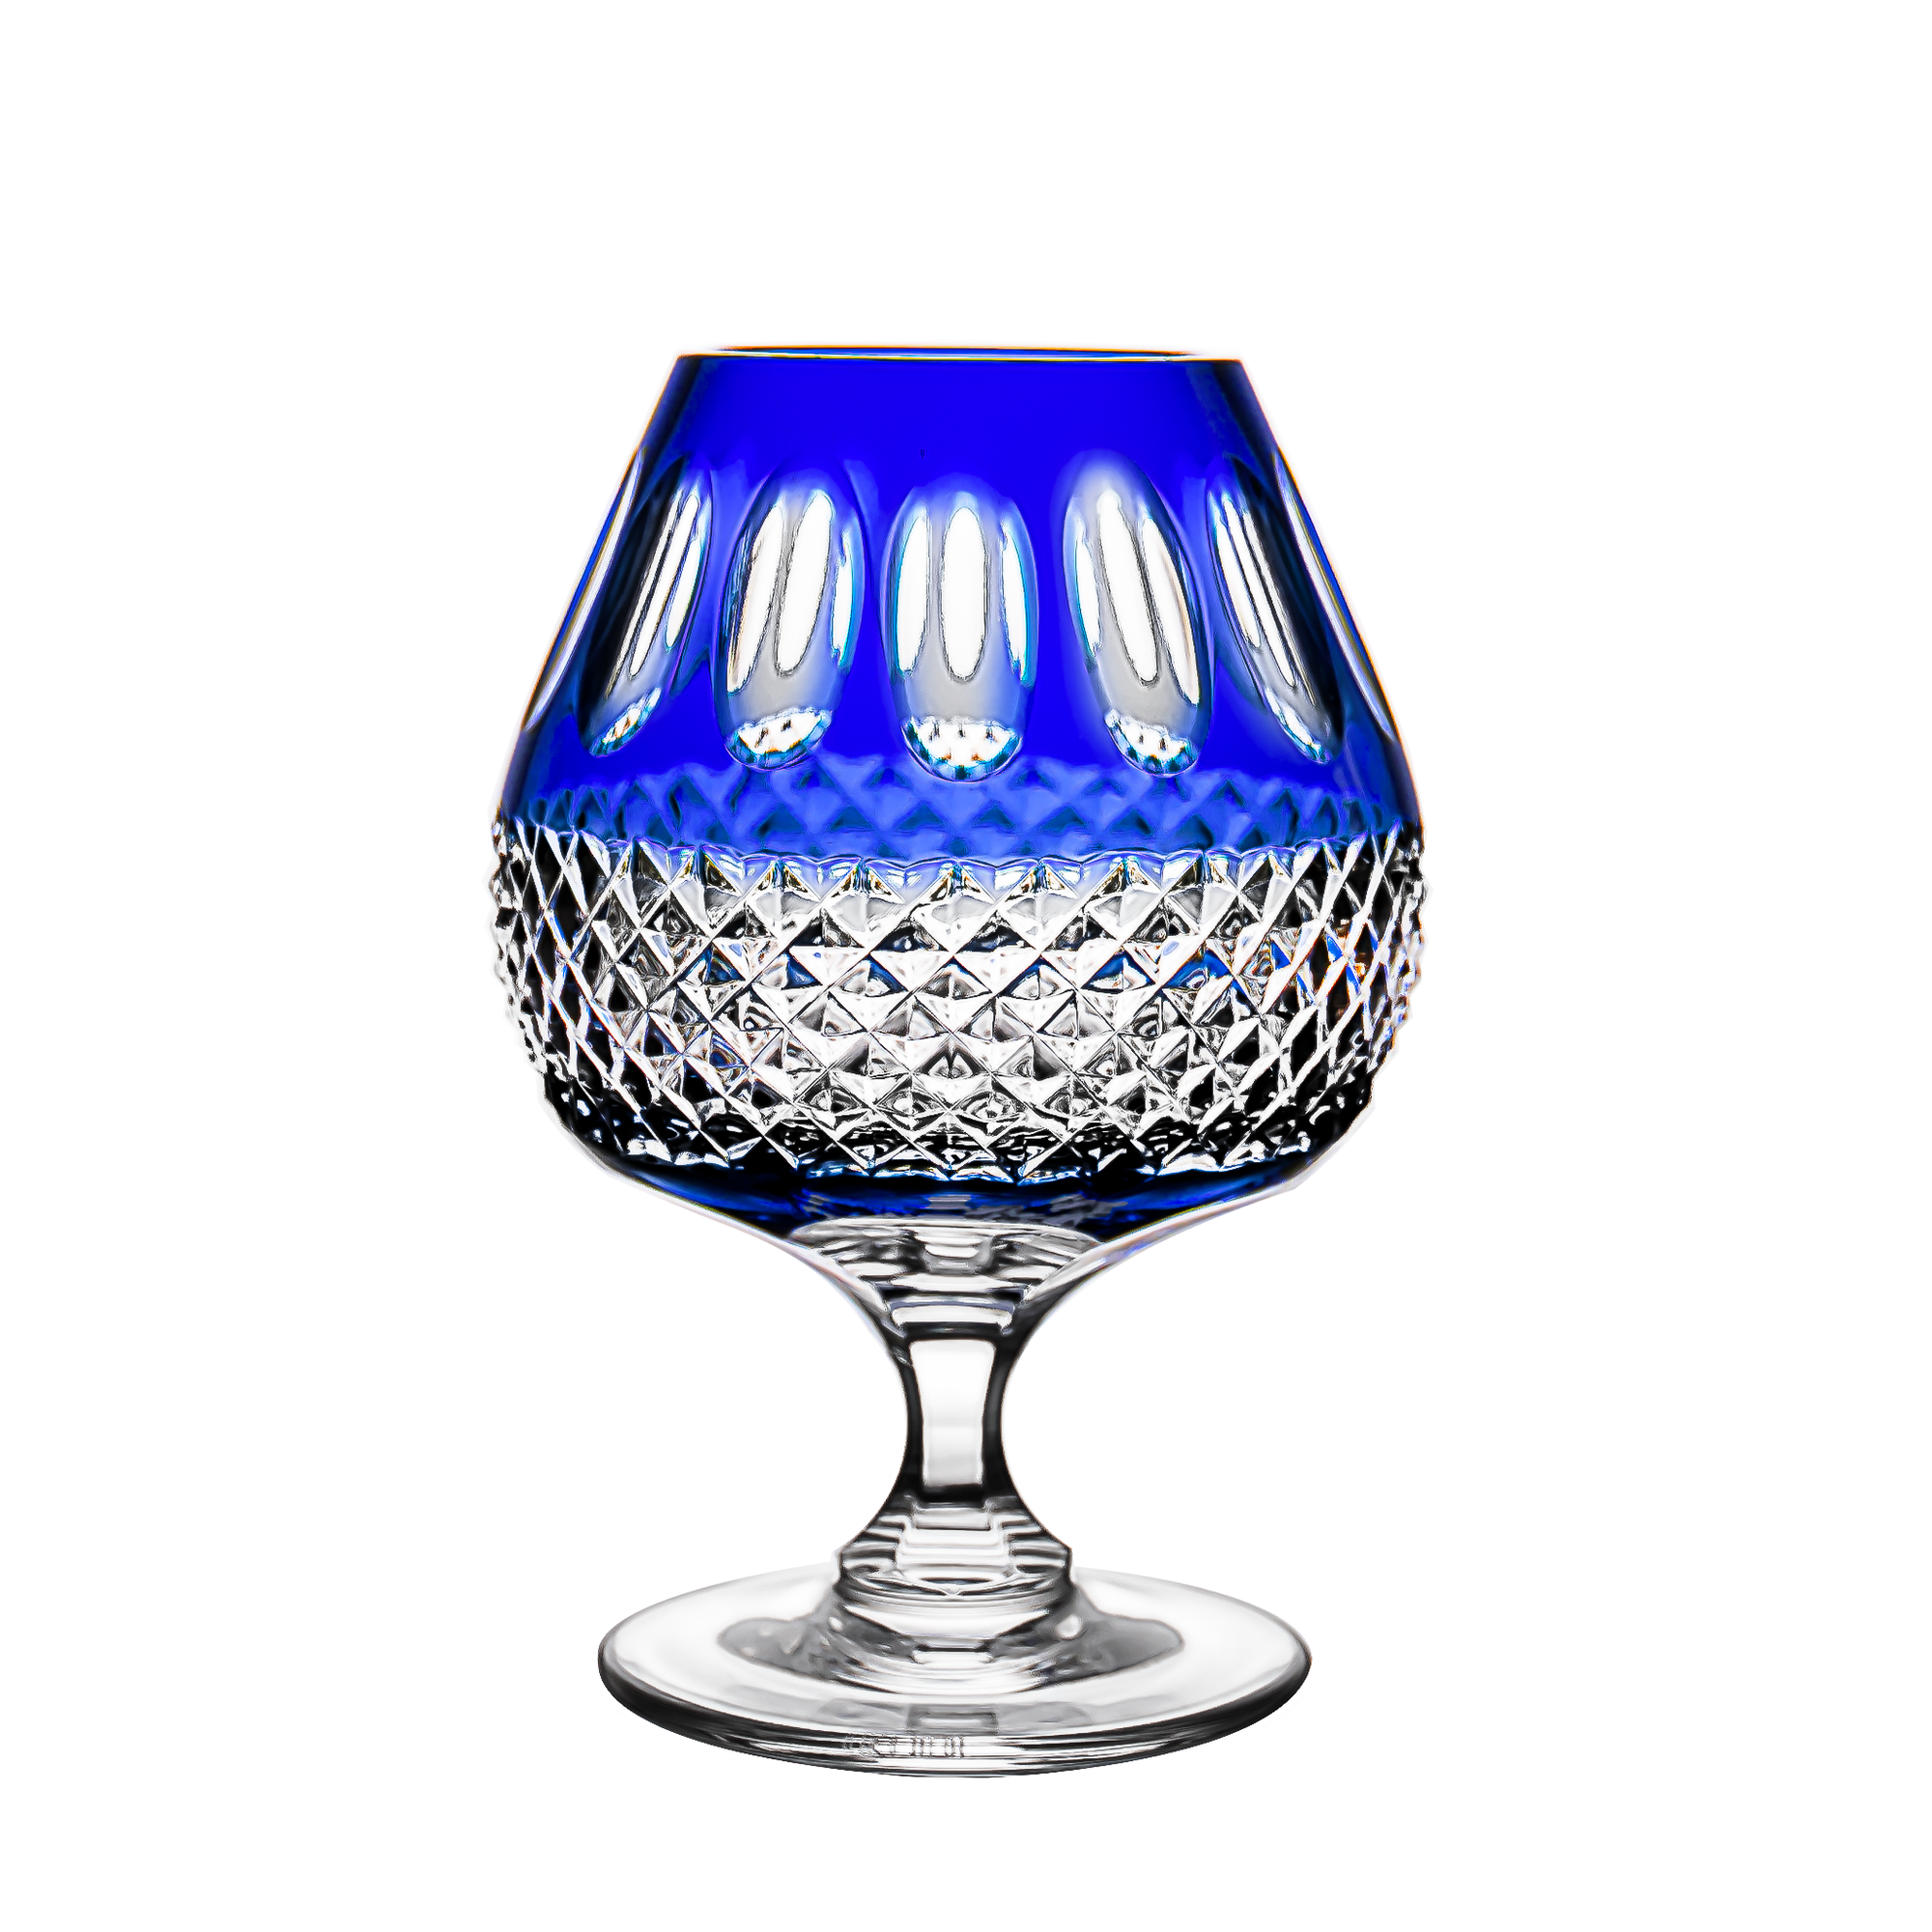 Colleen Encore Blue Brandy Glass 1st Edition